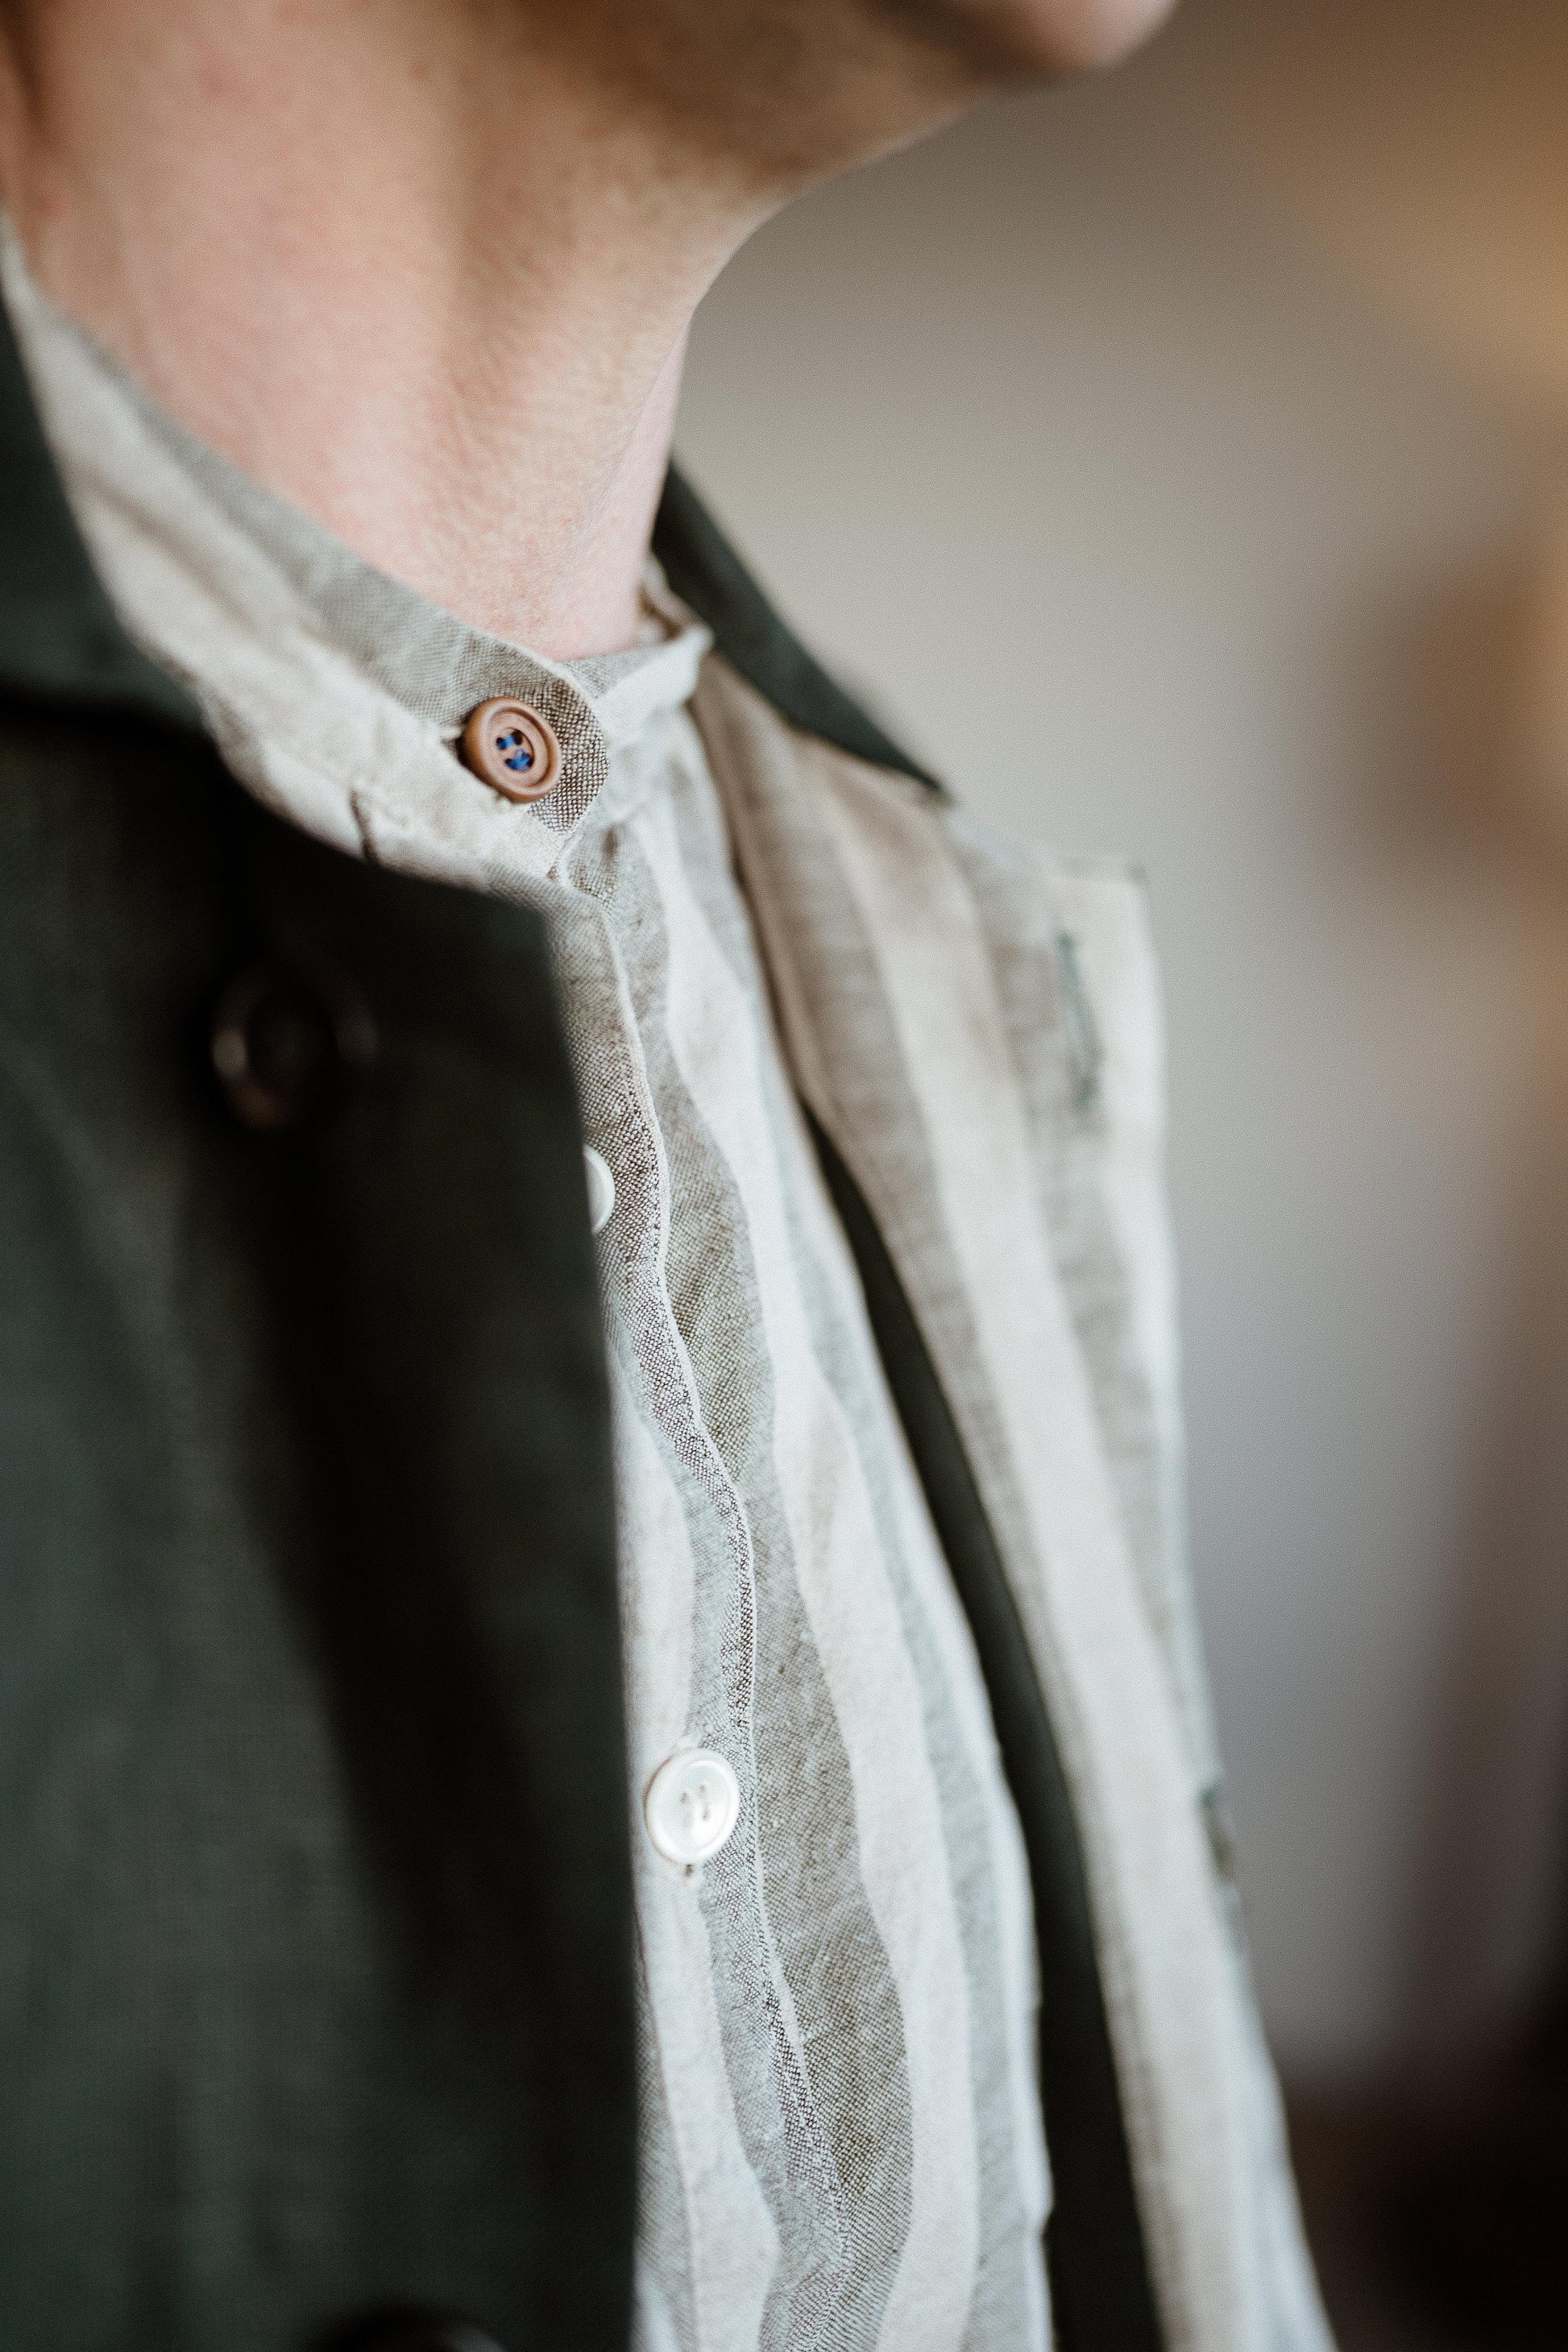 MAVERICK SHIRT | Introducing our first menswear pieces- this one is the Maverick. A relaxed fit, featuring a grandad collar, patch pocket and our signature contrast button. This shirt is a fun spin on a classic and is pairs well with our Forest overshirt.